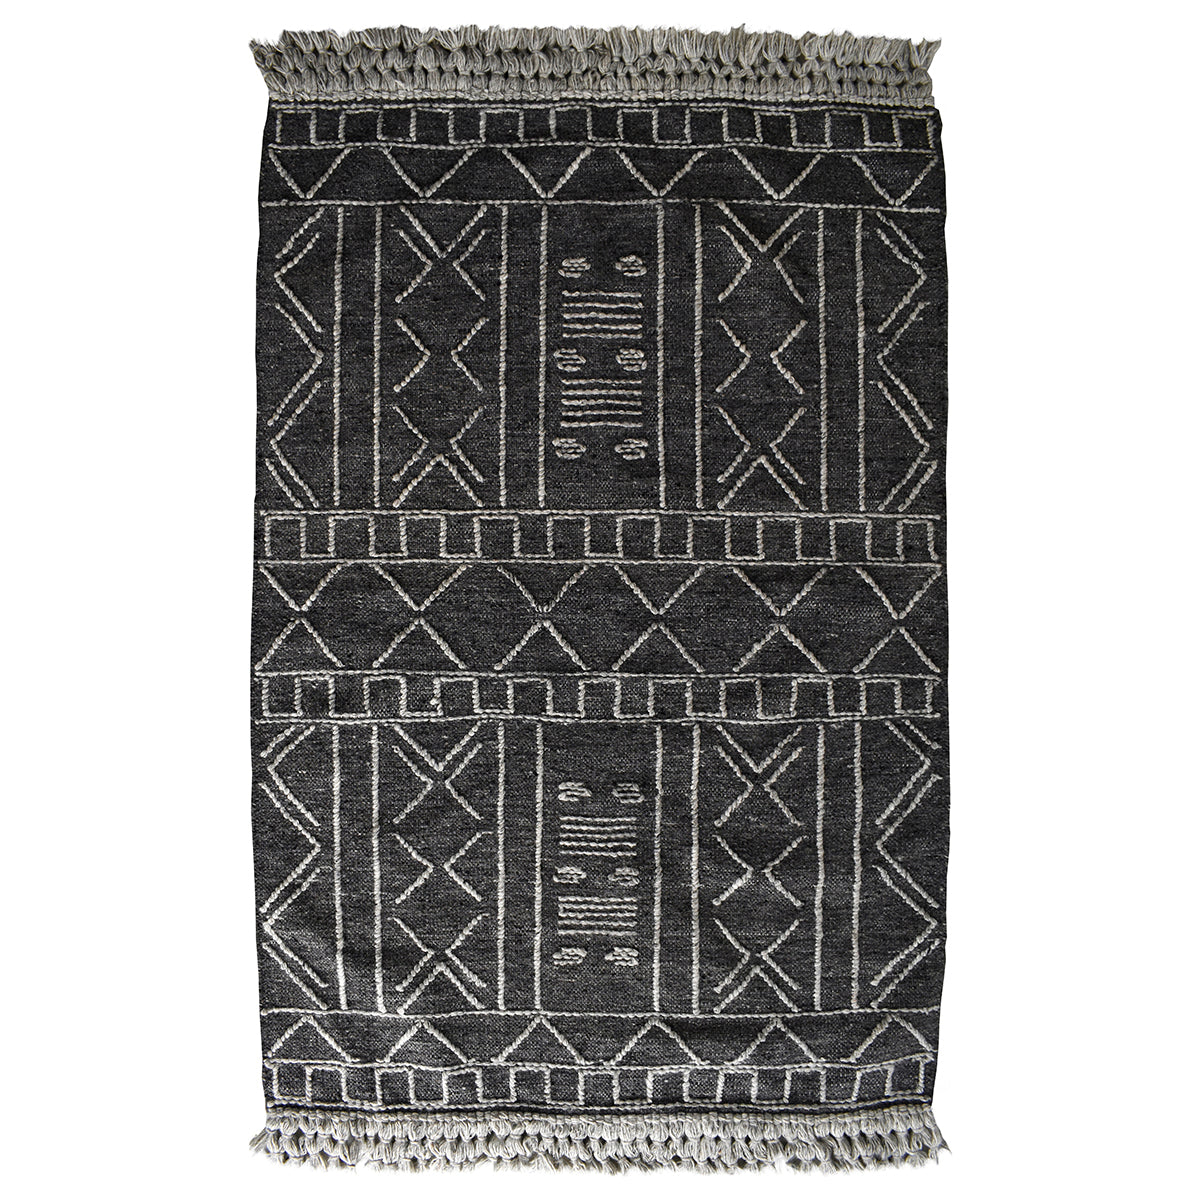 An Aish Rug 1200x1700mm from Kikiathome.co.uk, a black and white tribal rug with fringes for interior decor.